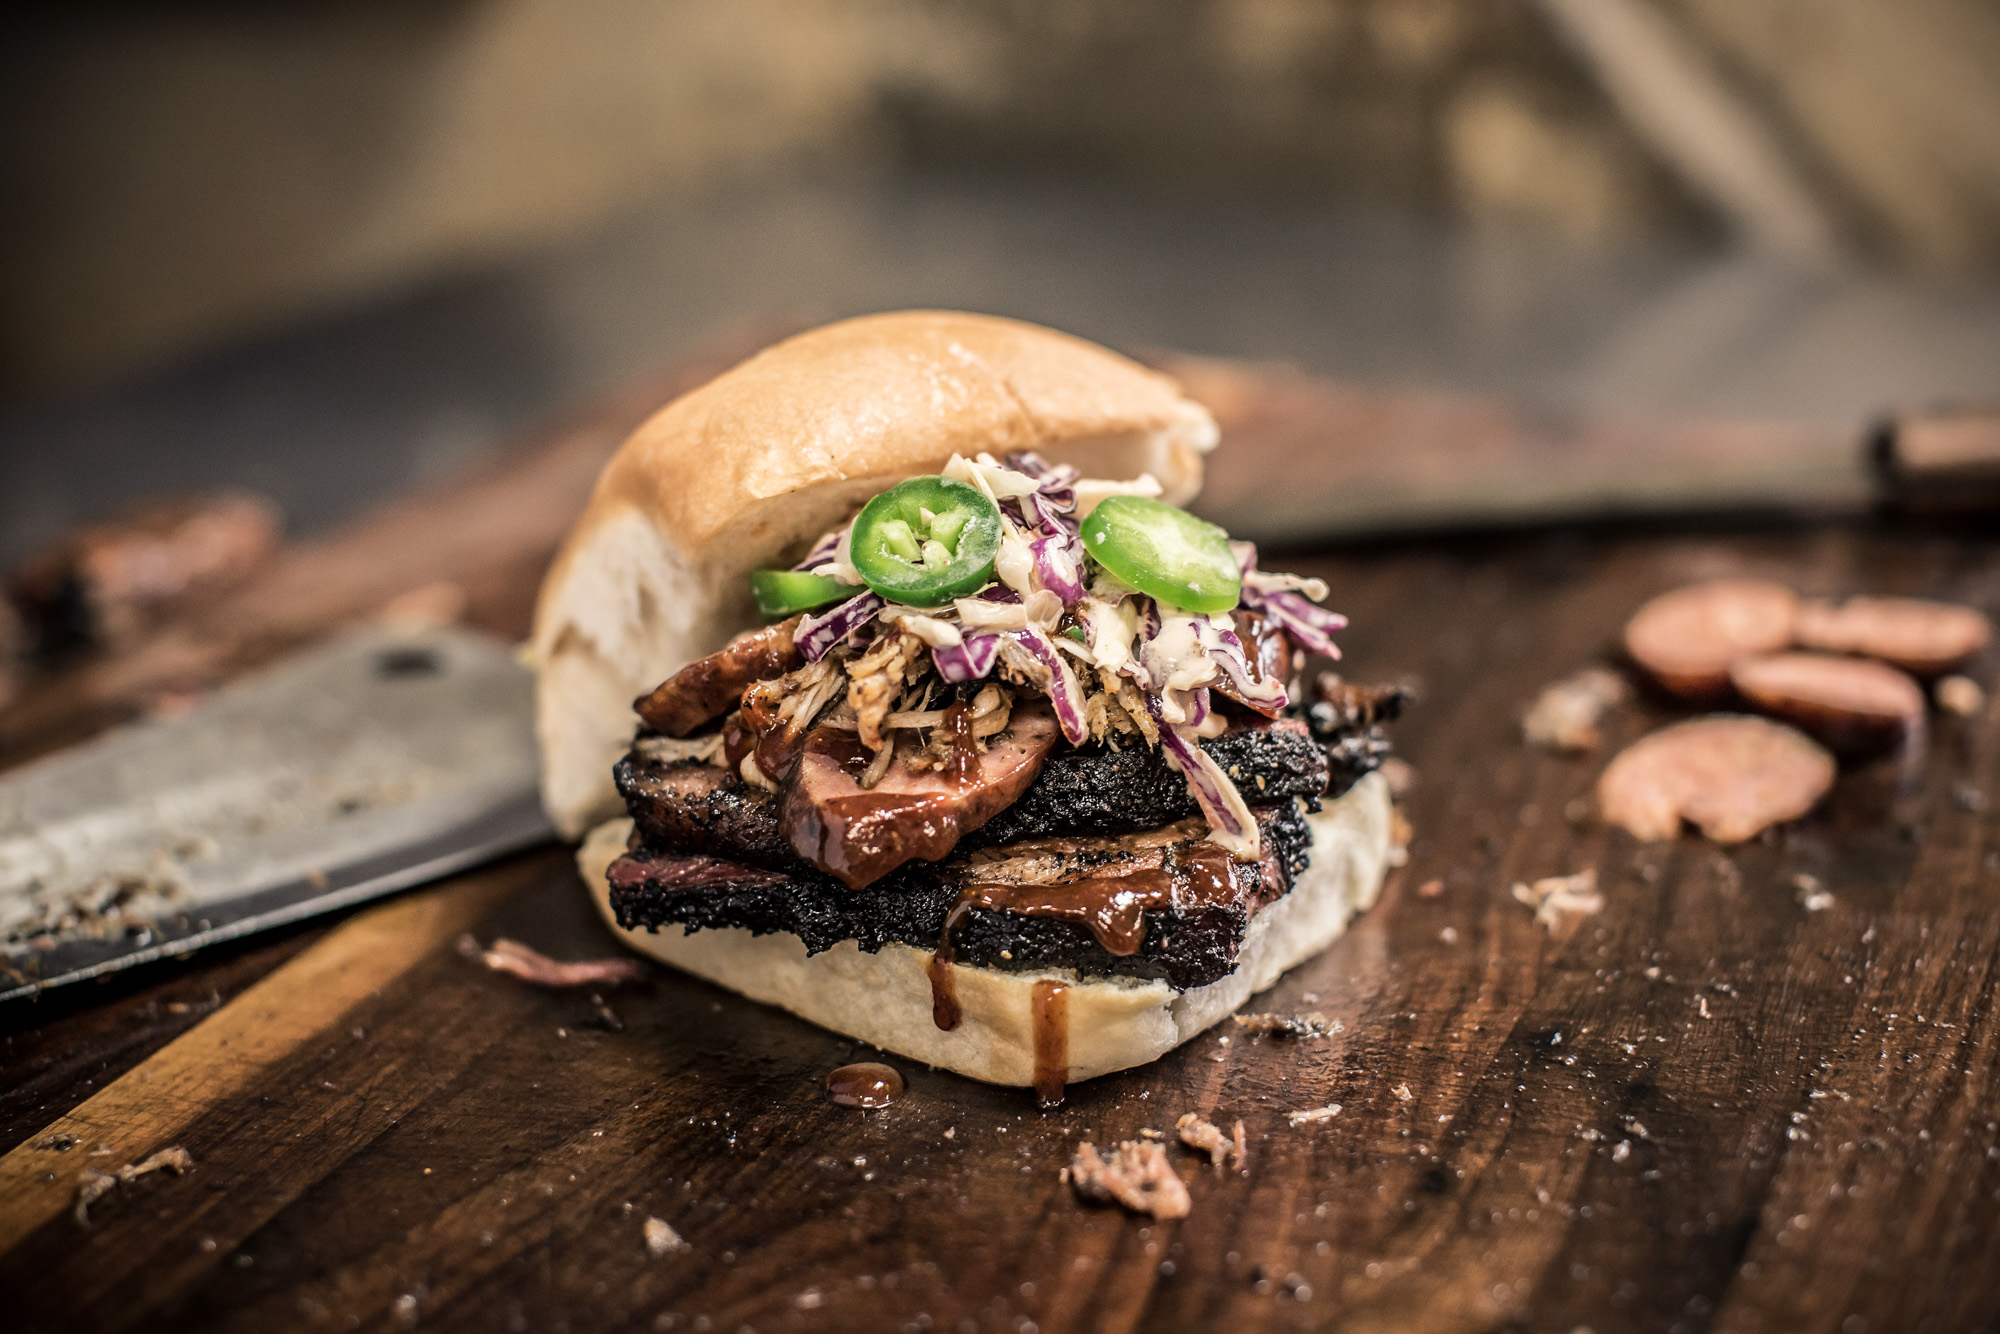 pecan lodge bbq sandwich sitting on wood table with brisket sausage coleslaw pit master sandwich